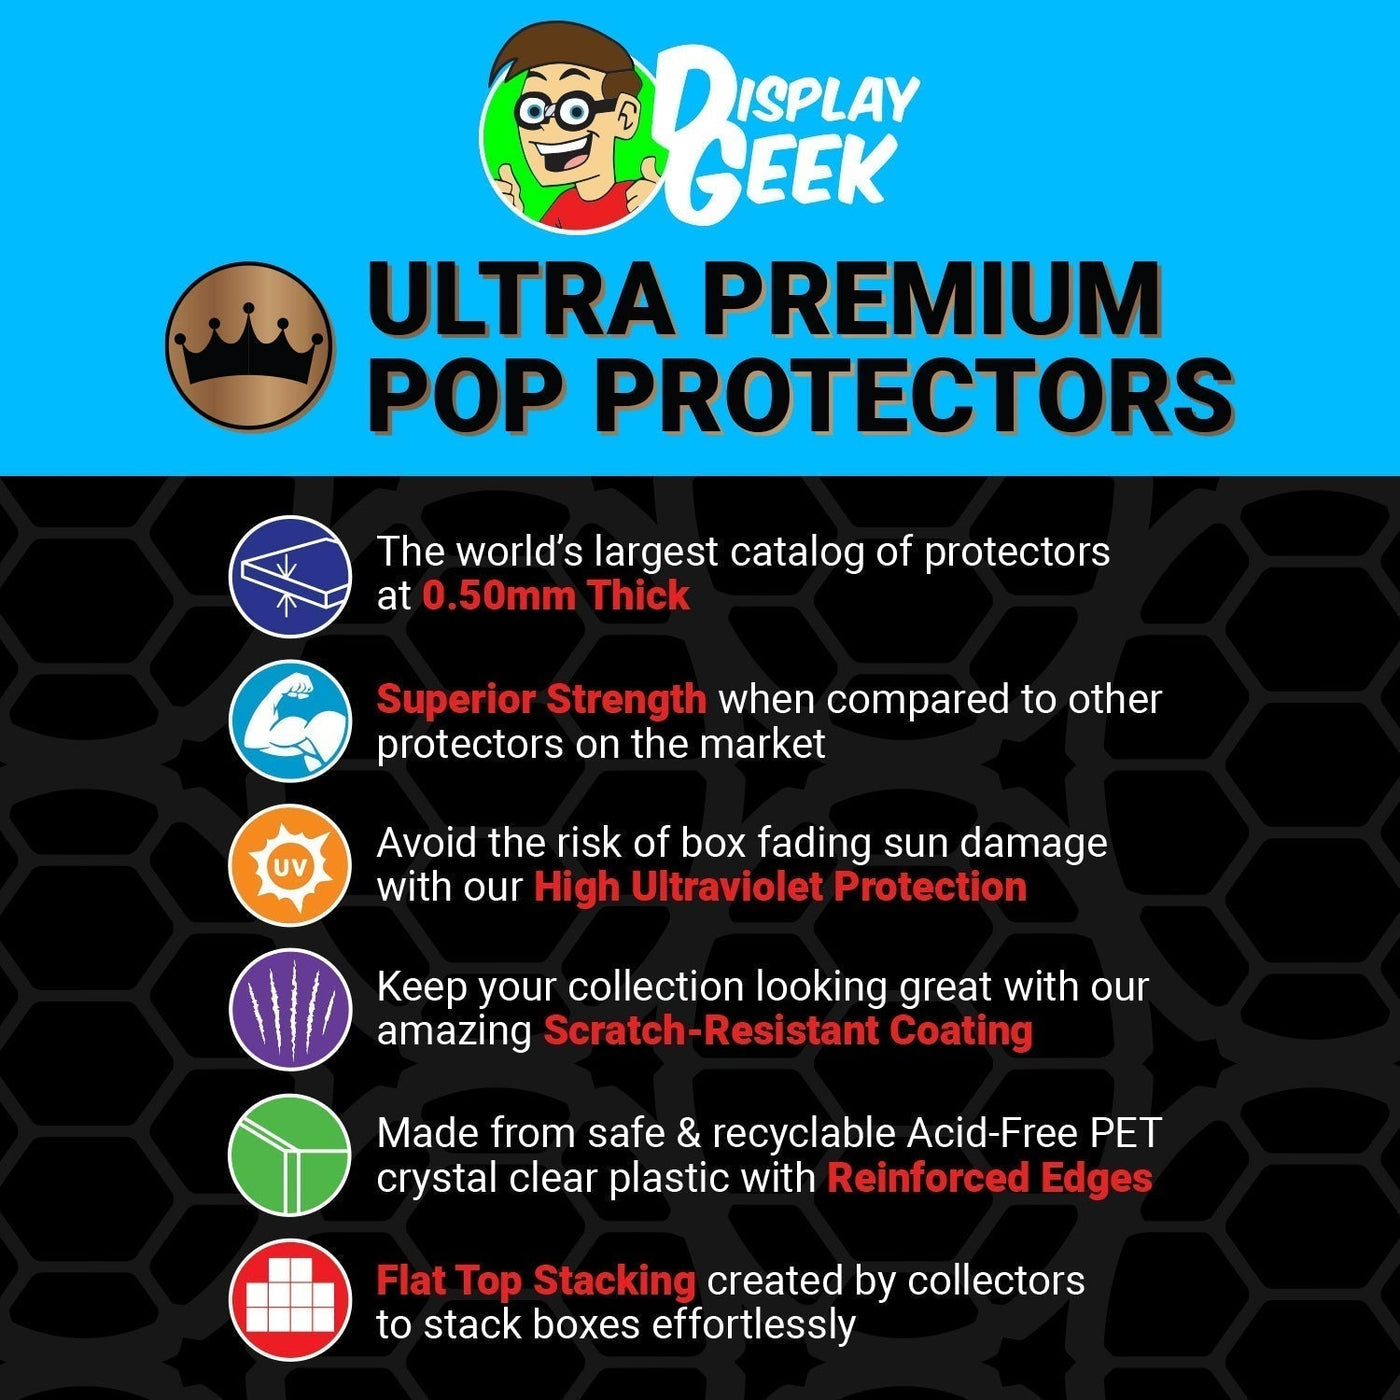 Pop Protector for Thor Avengers This Hostage Earth #38 Funko Pop Comic Covers on The Protector Guide App by Display Geek